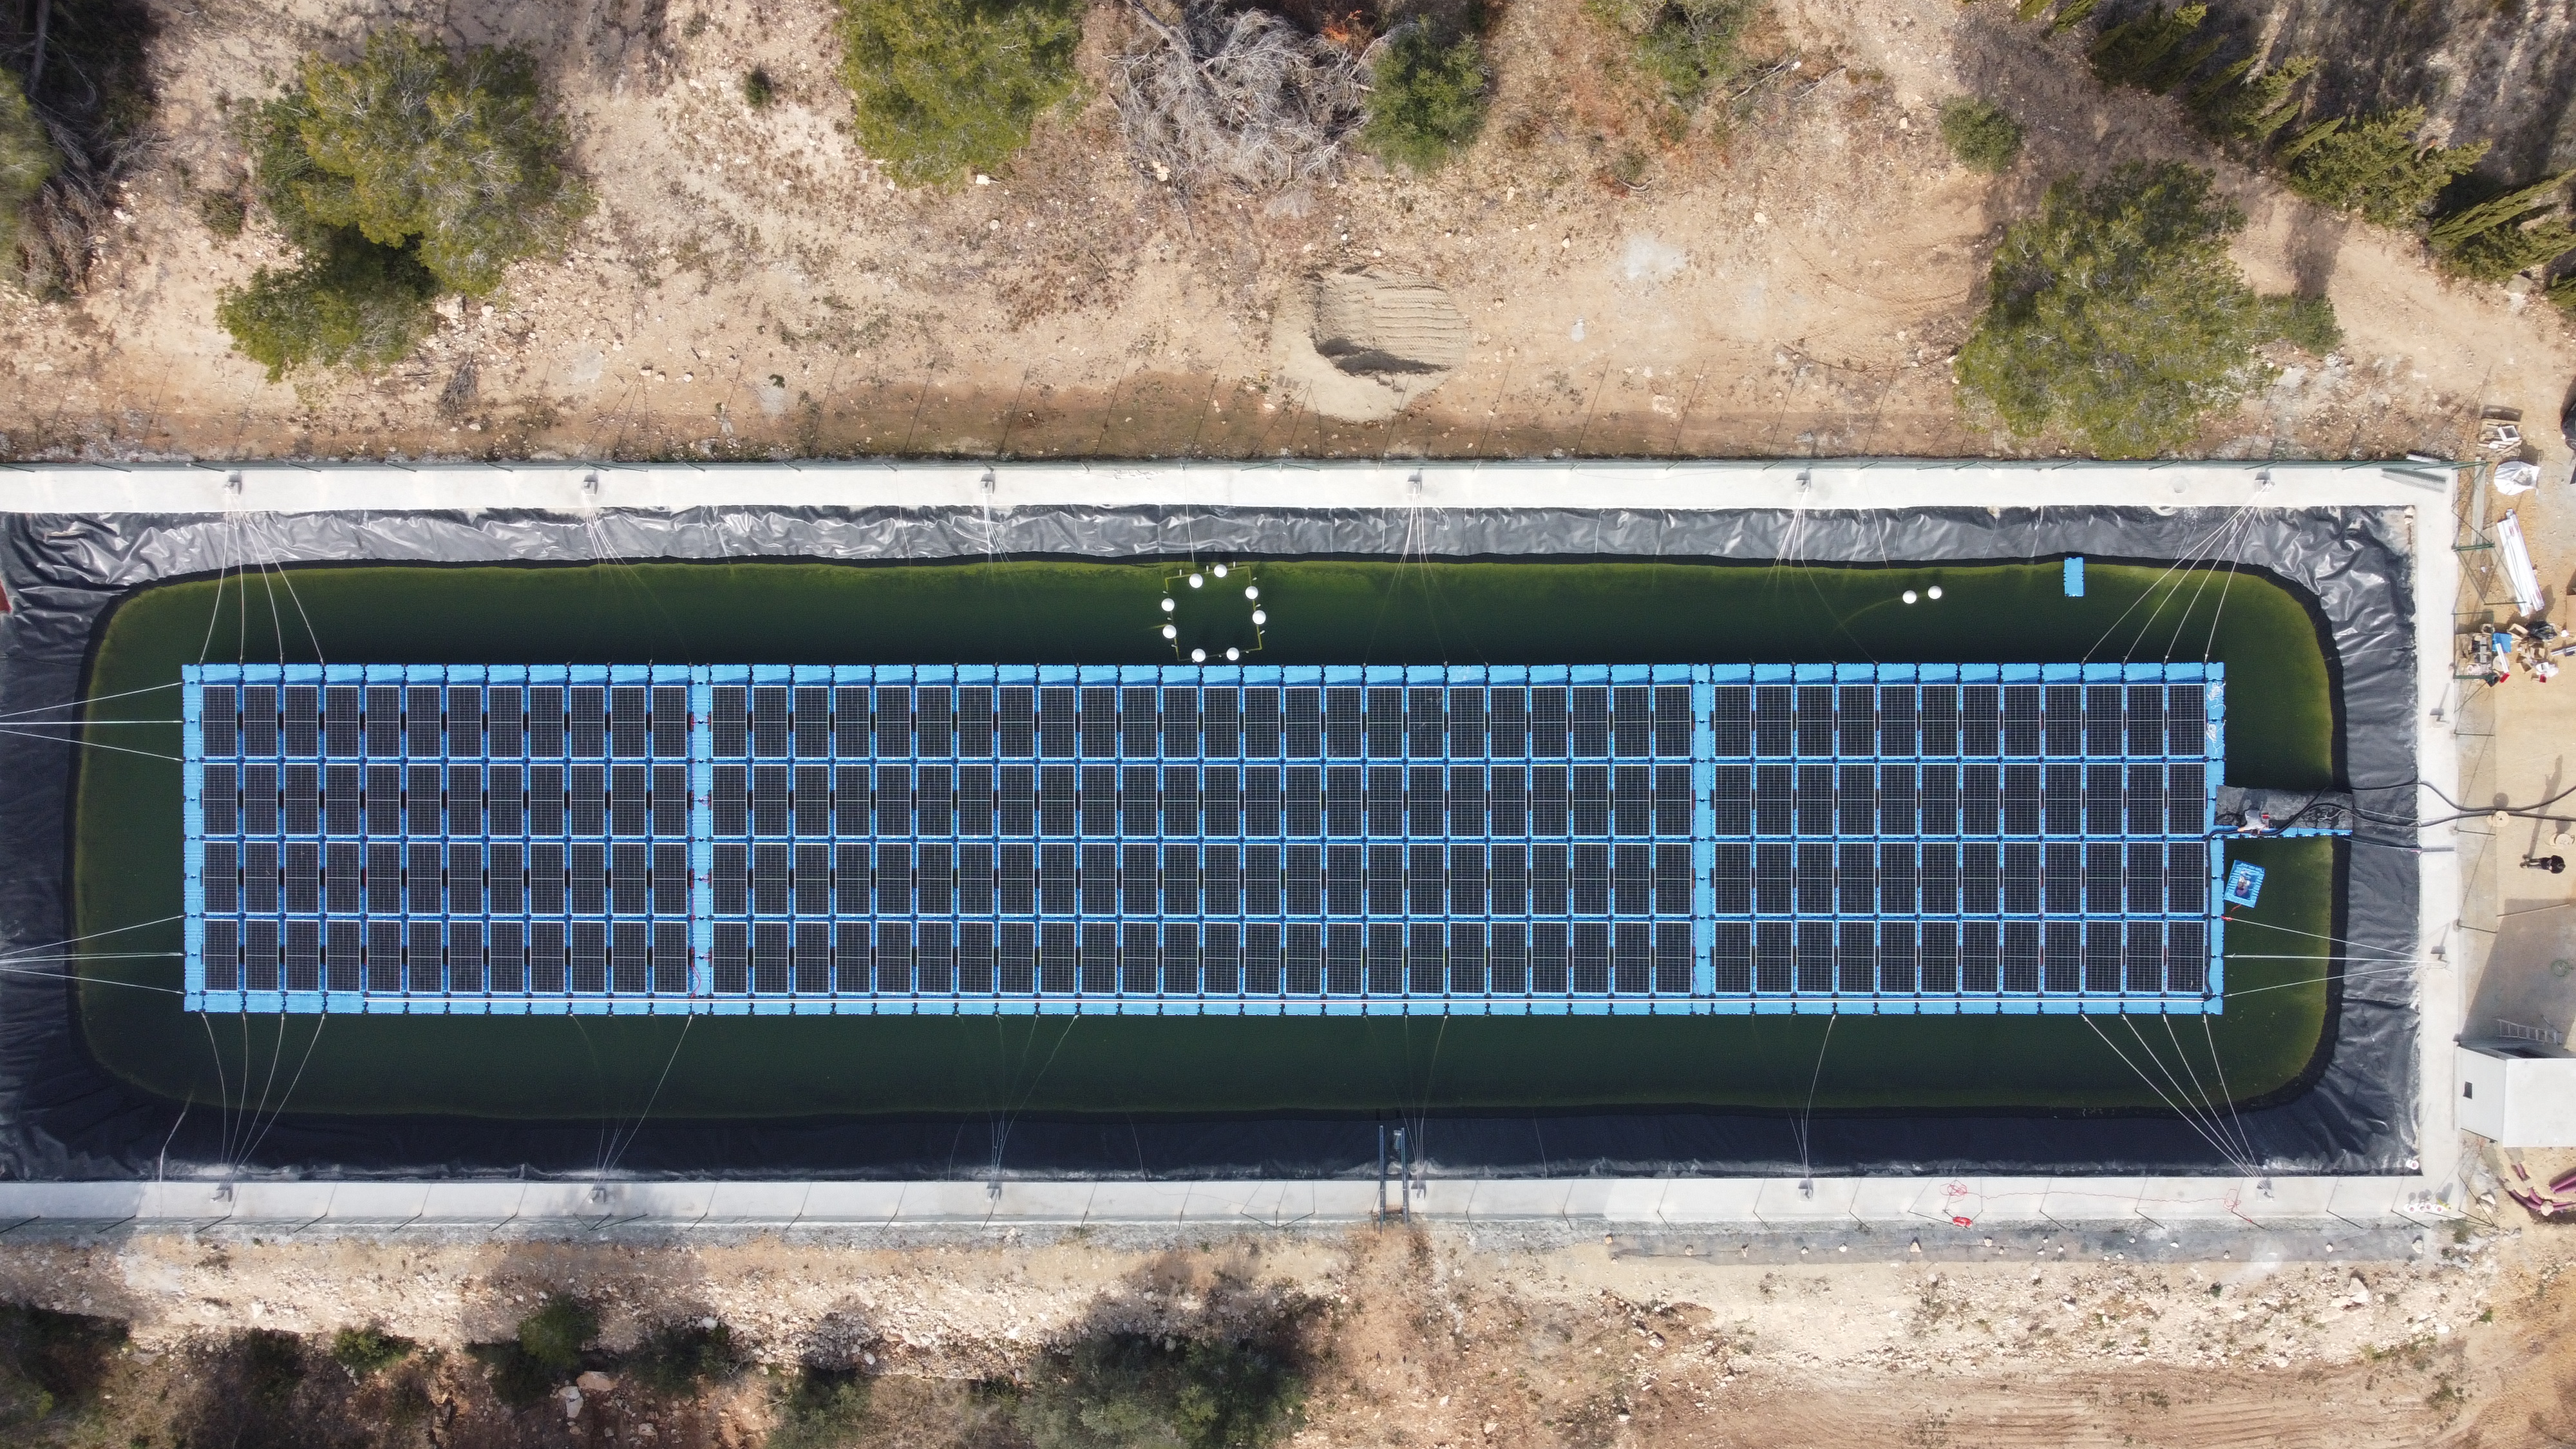 Soltech's first floating solar solution installed by Sud Renovables in Spain